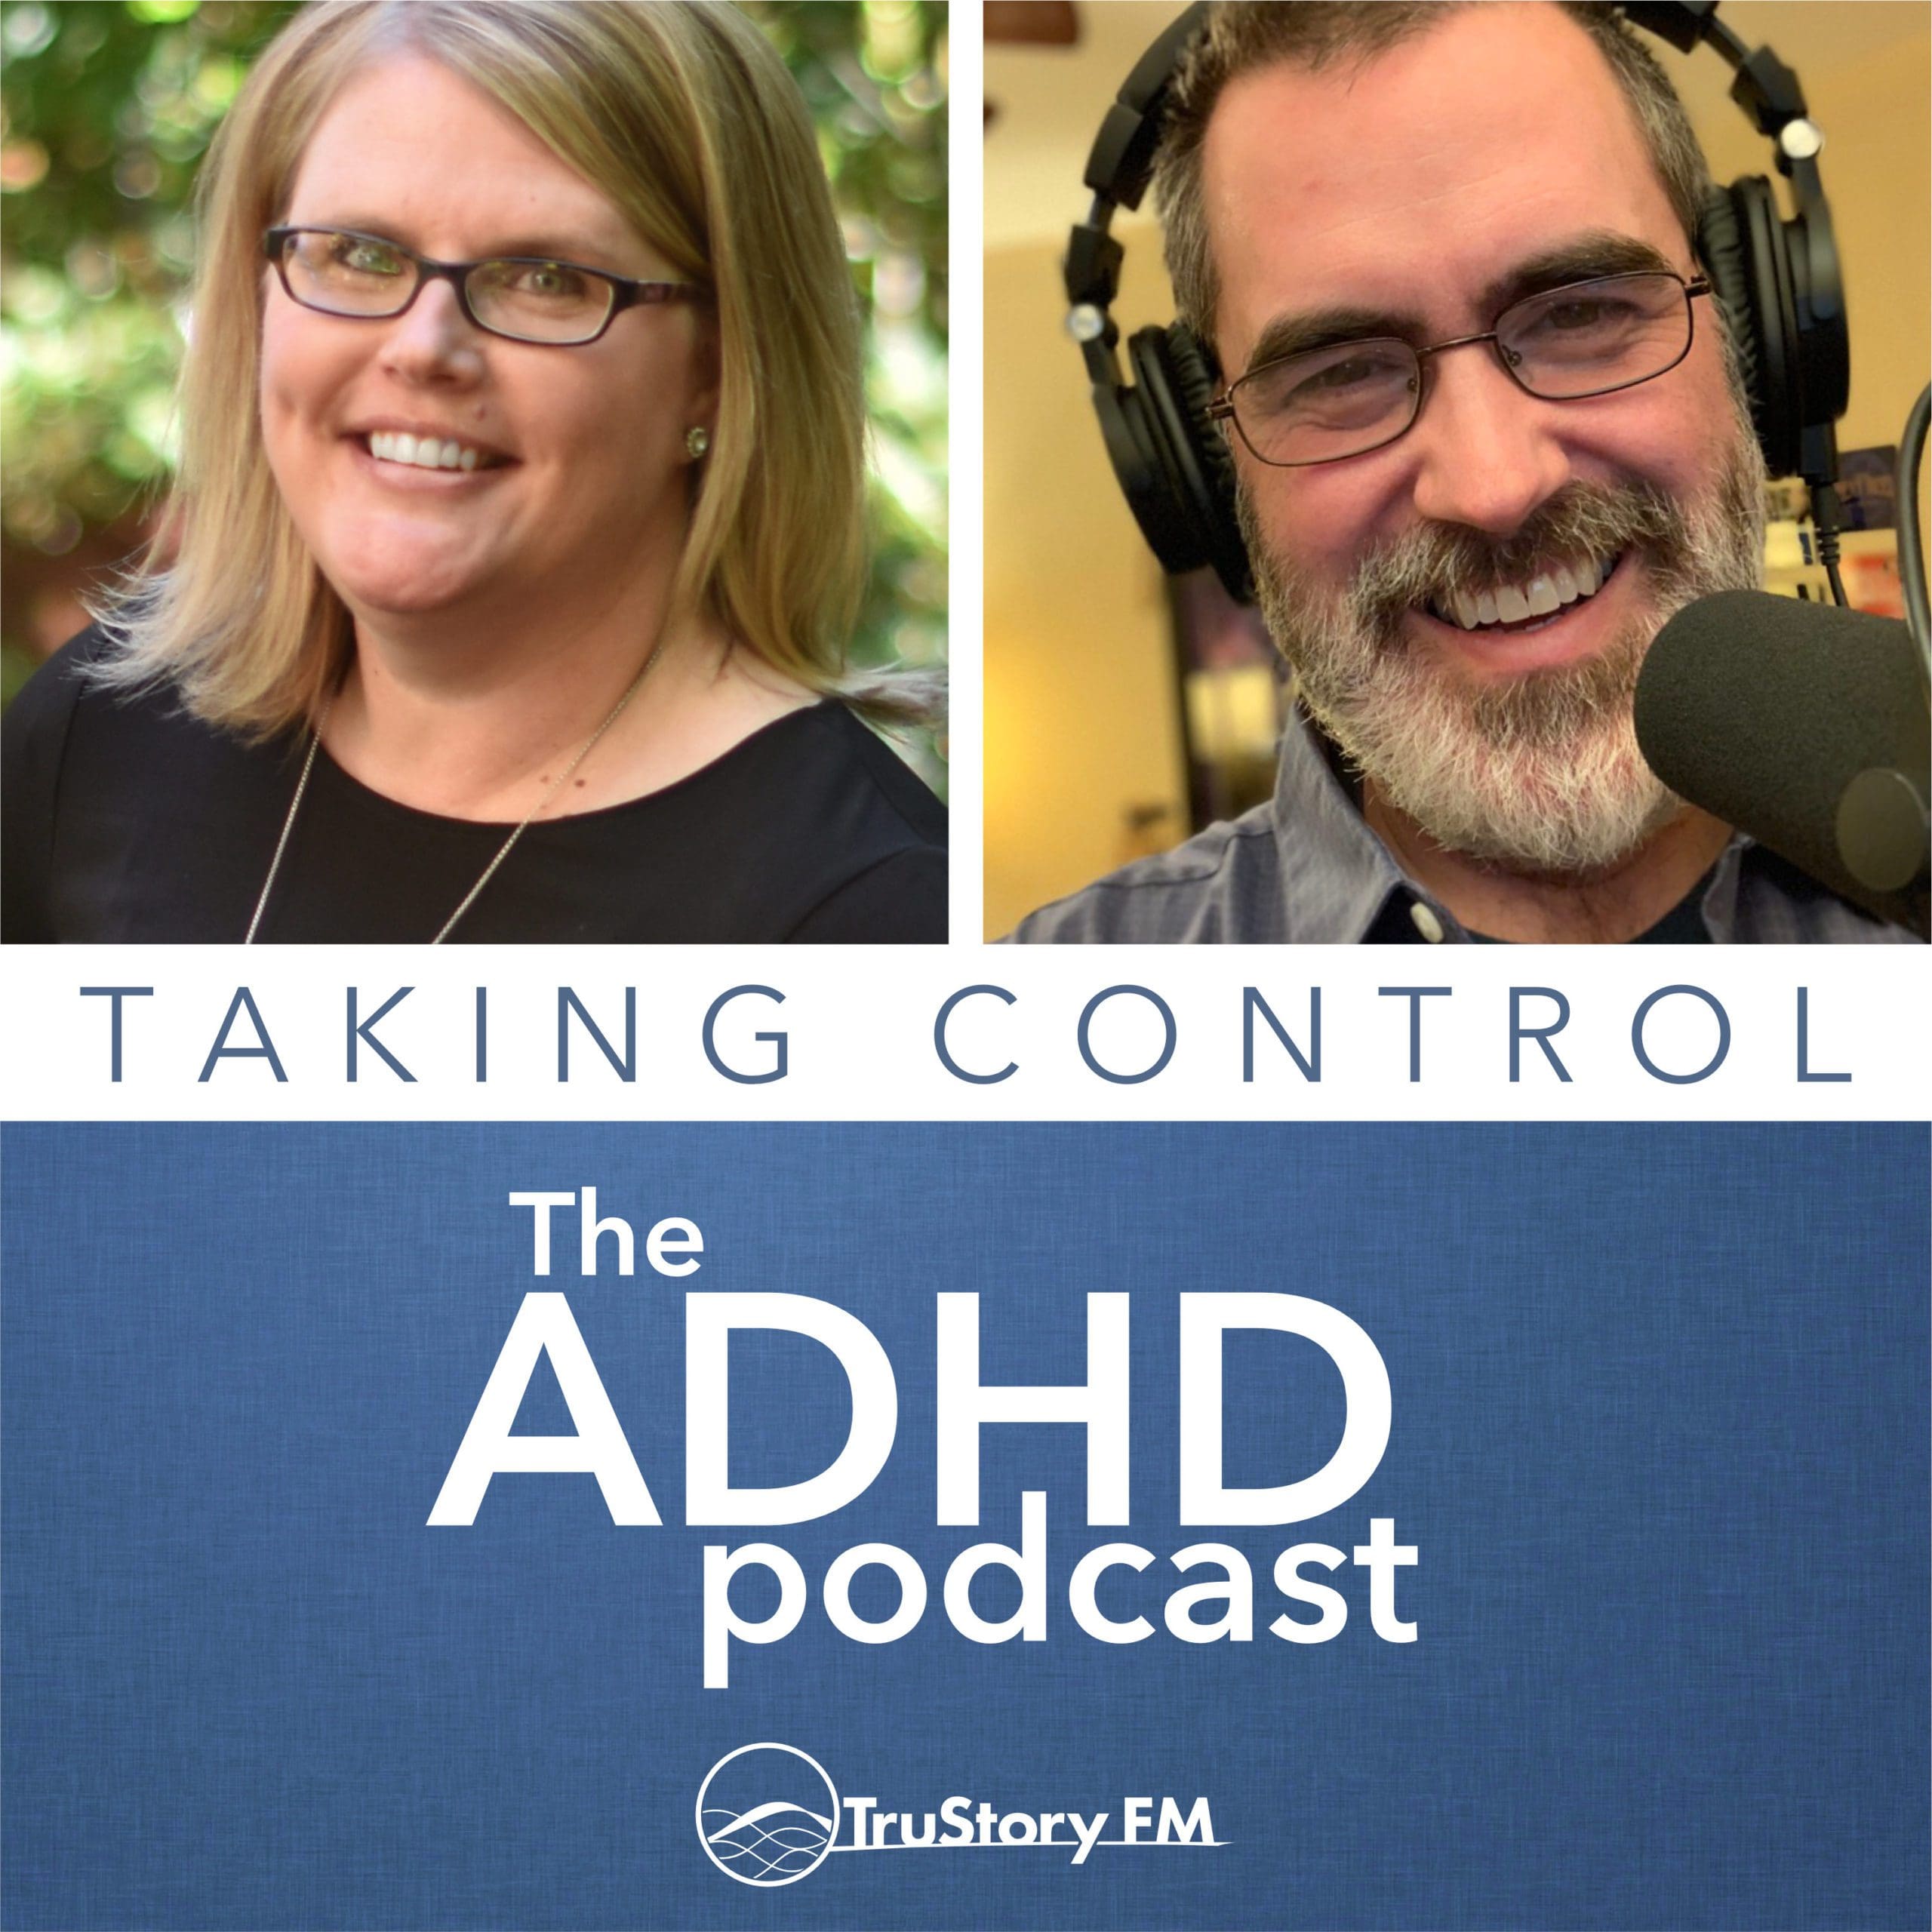 Taking Control The ADHD Podcast Logo